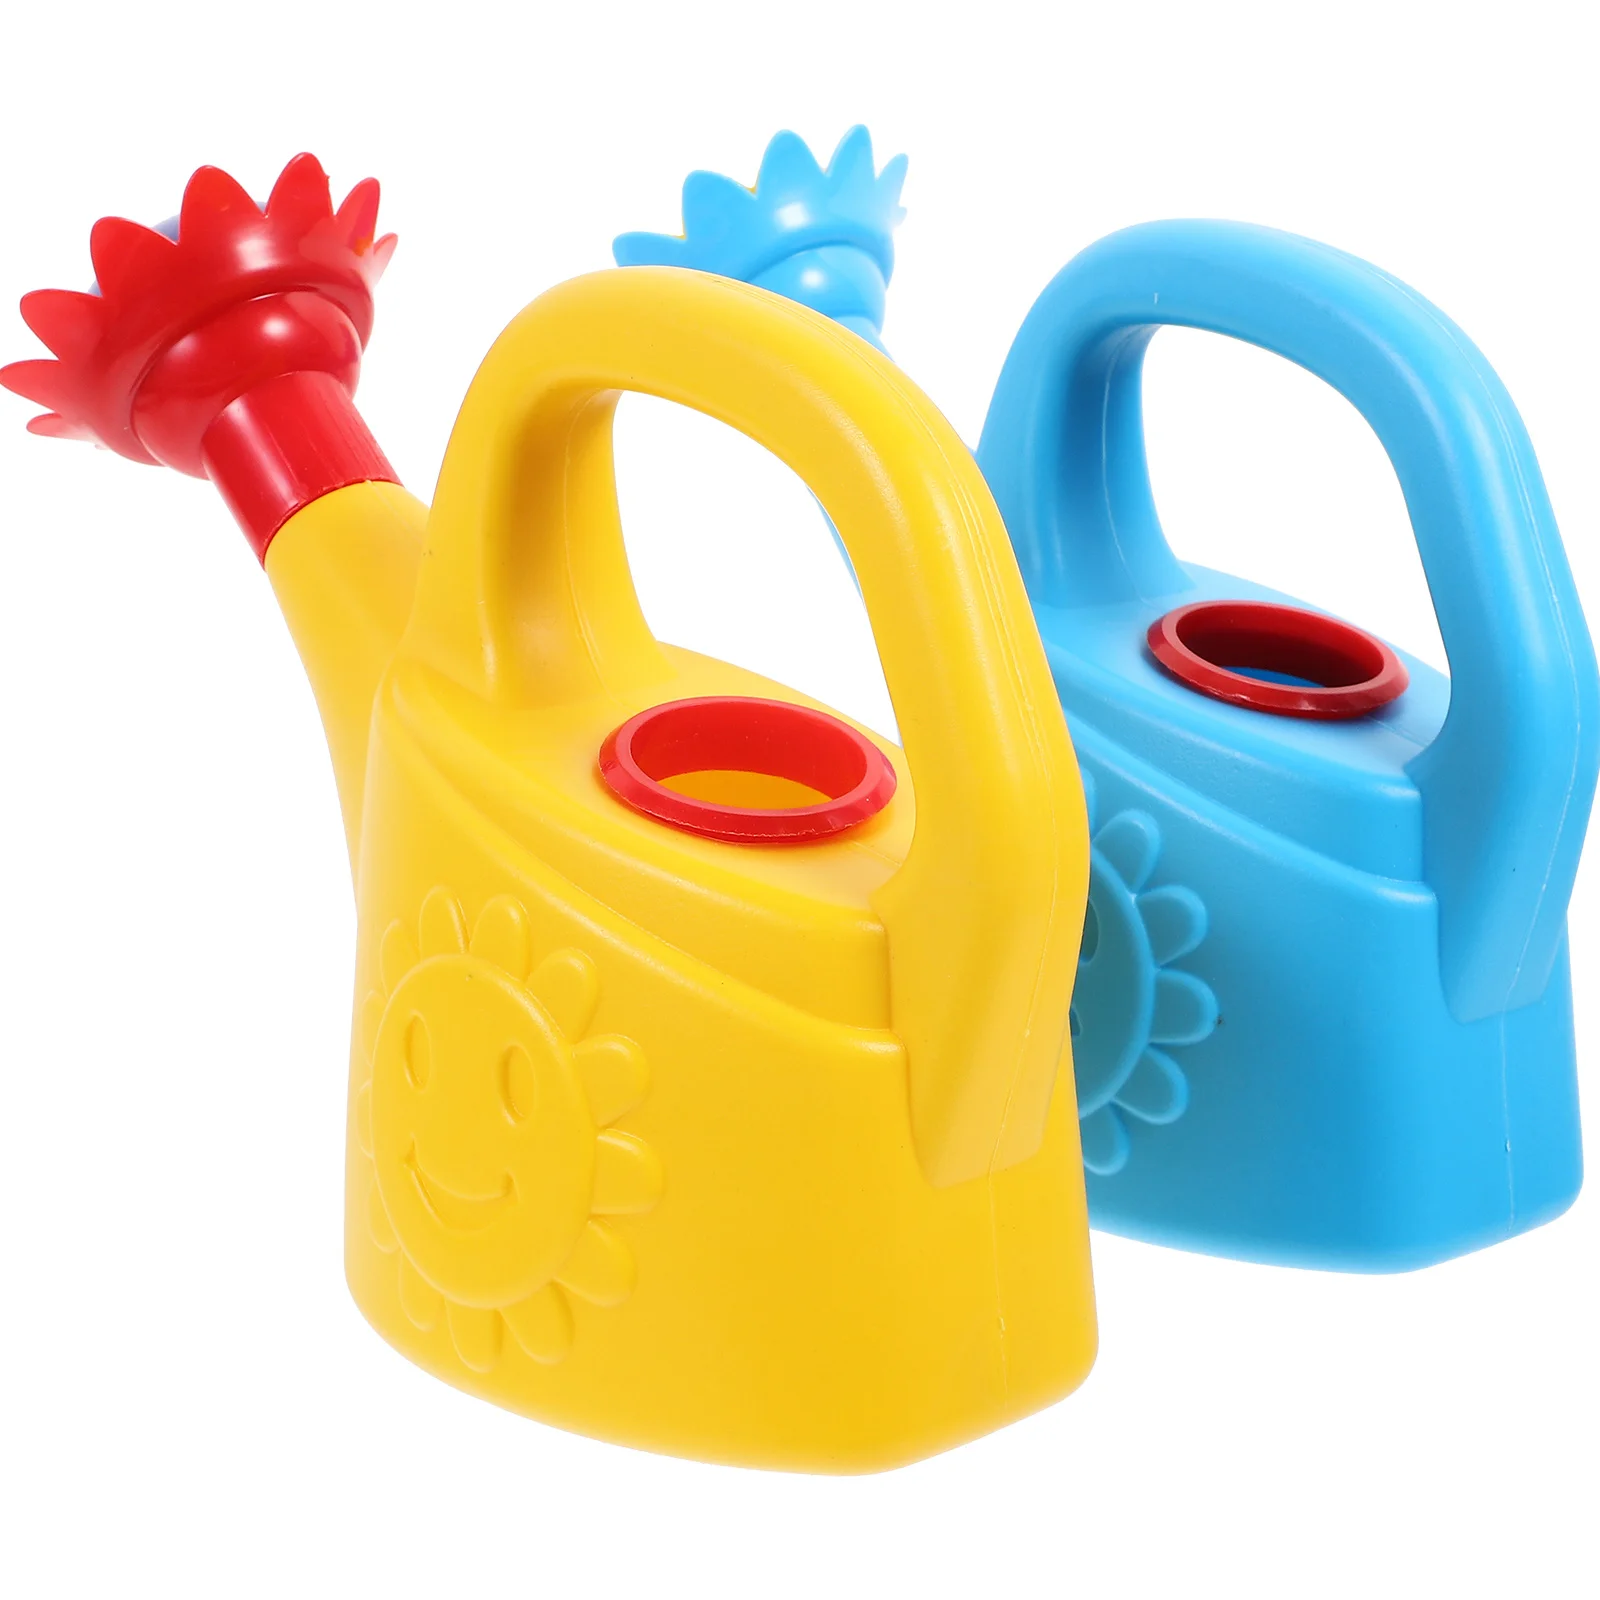 

2 Pcs Watering Can Children Bath Toy Baby Bathing Beach Outdoor Toys Small Jug Thicken Plastic Bathtub Shower